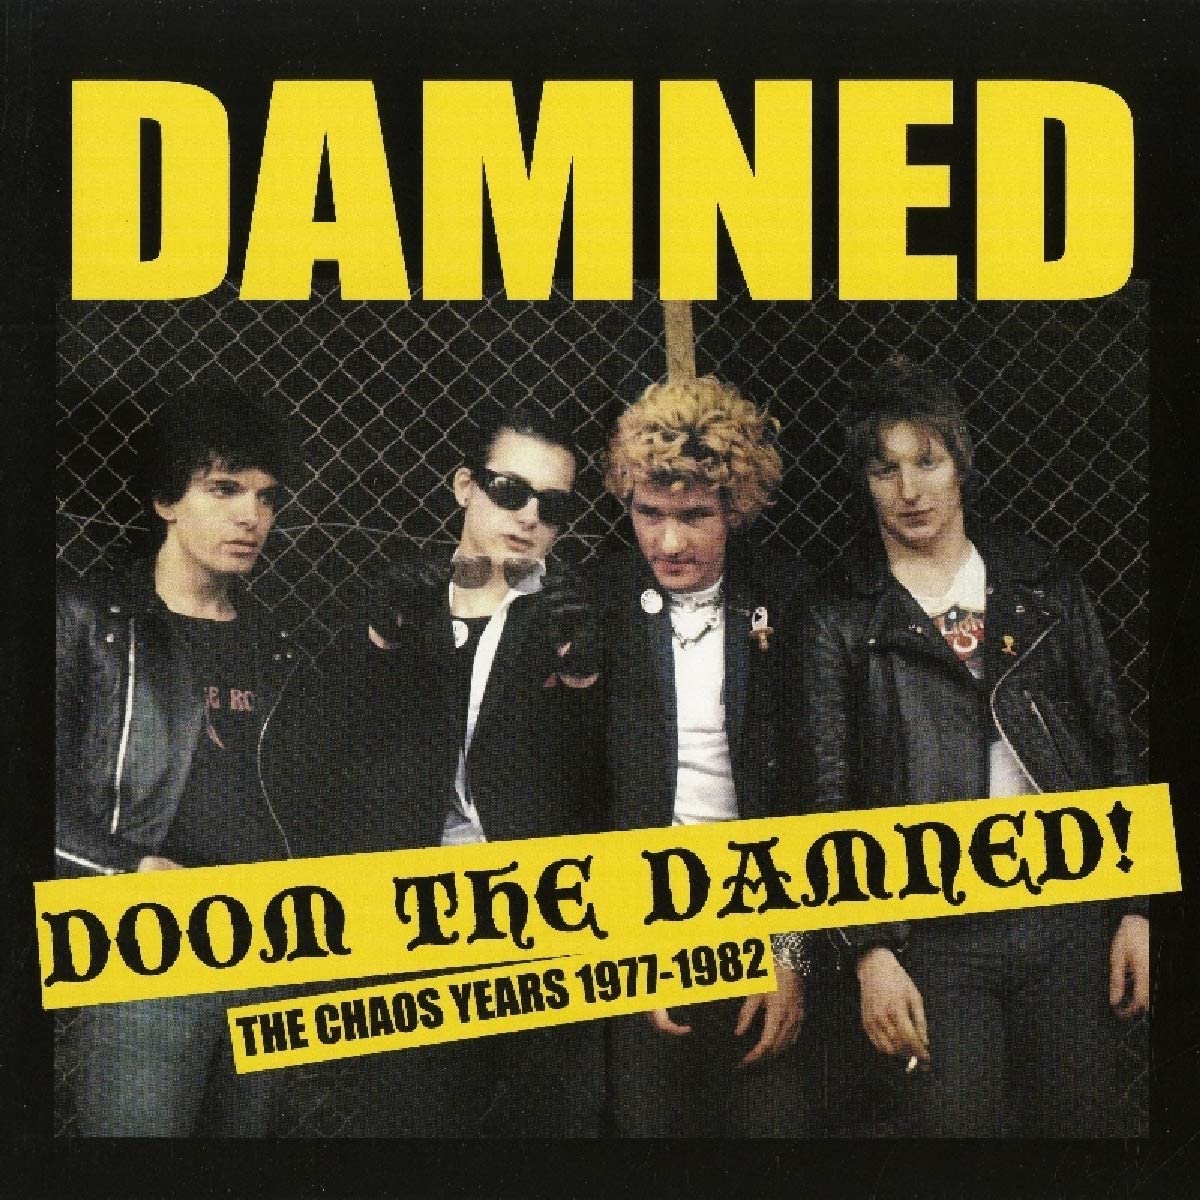 Damned, The - The Chaos Years 1977-1982: Doom The Damned! (RSD2018) - LP